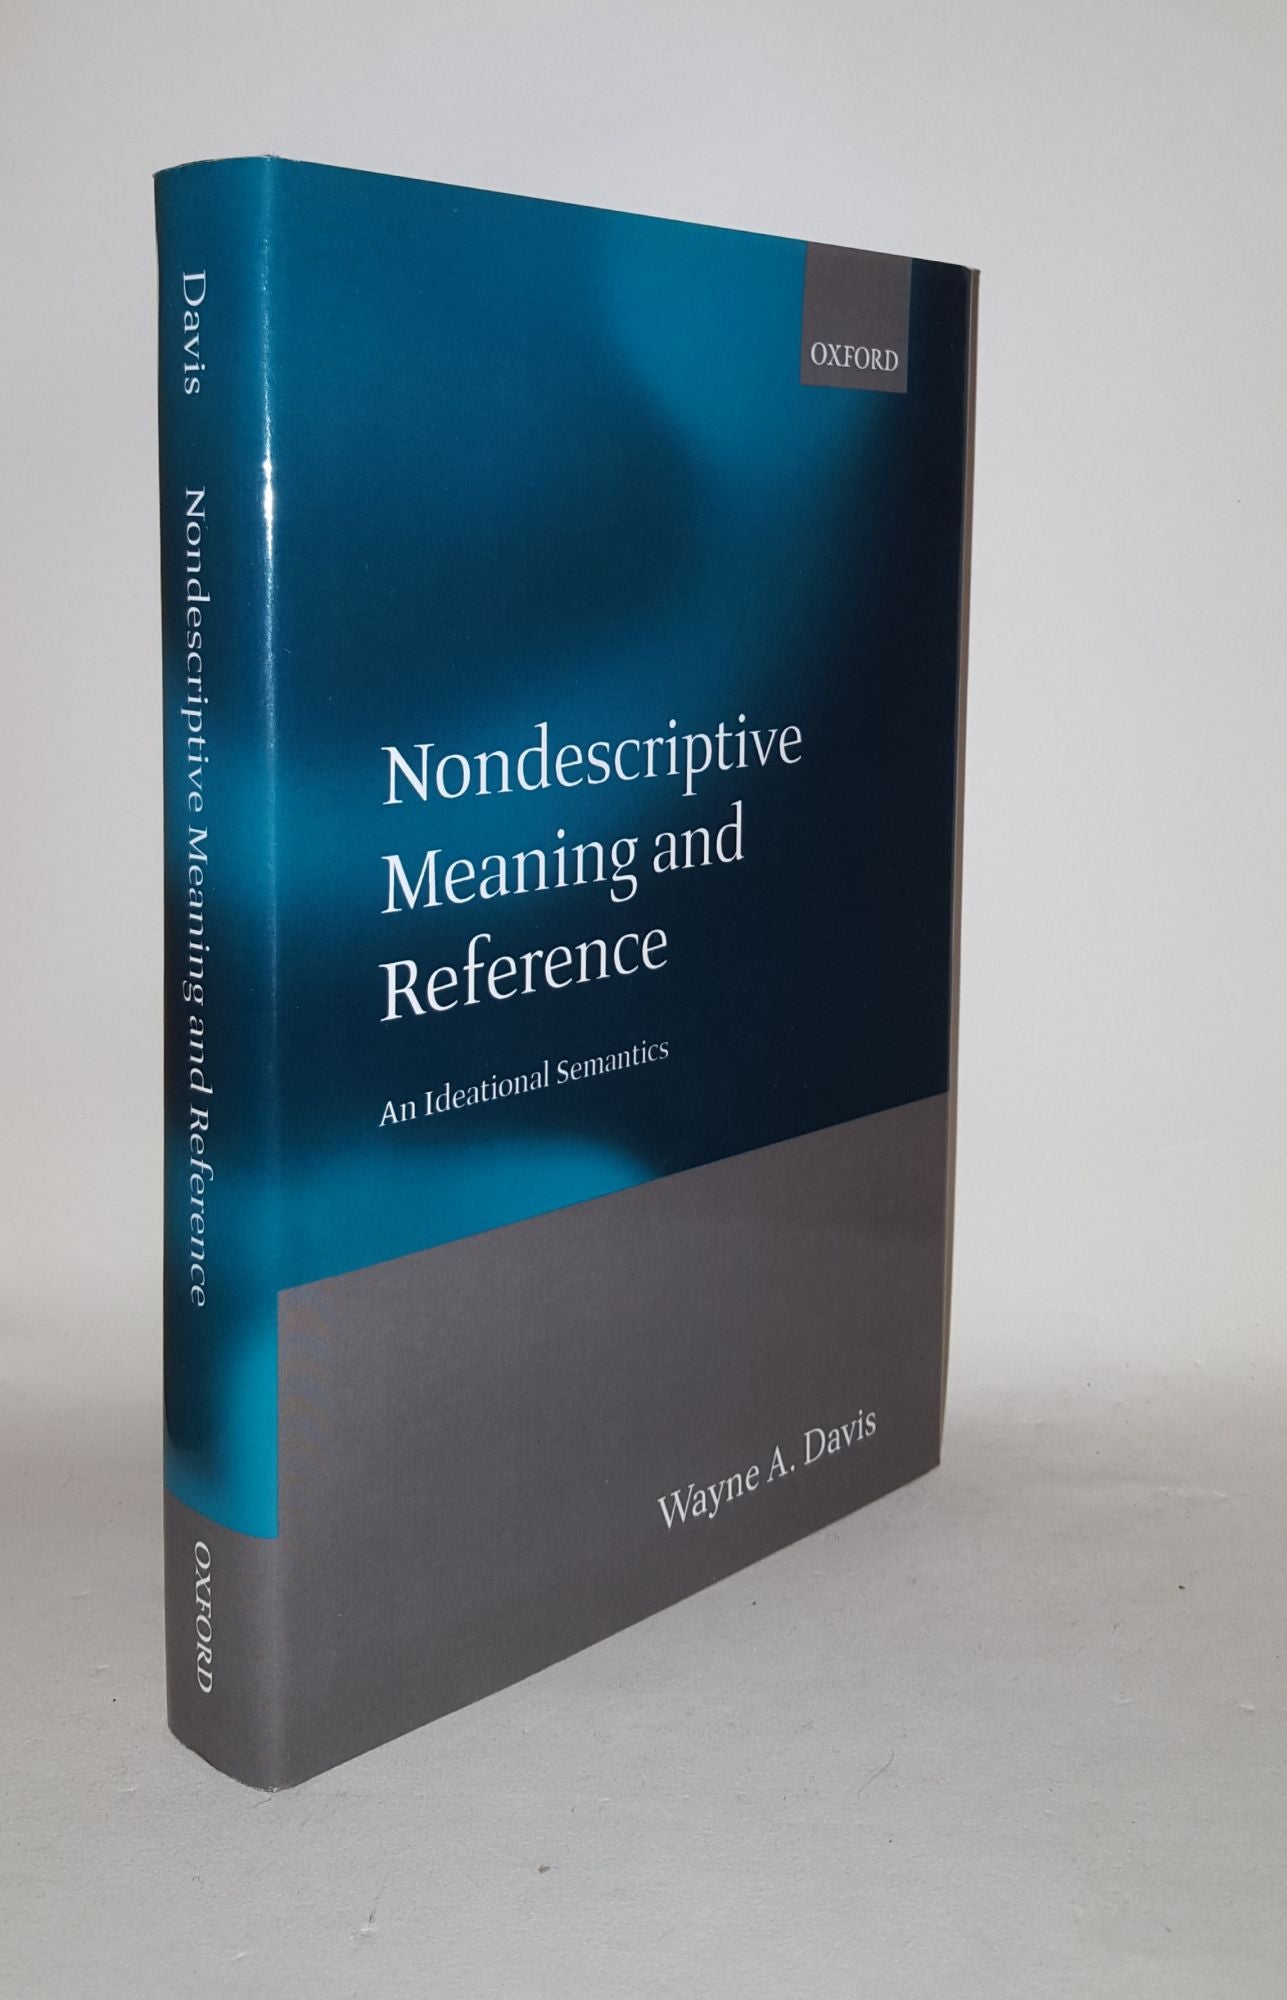 DAVIS Wayne A. - Nondescriptive Meaning and Reference an Ideational Semantics